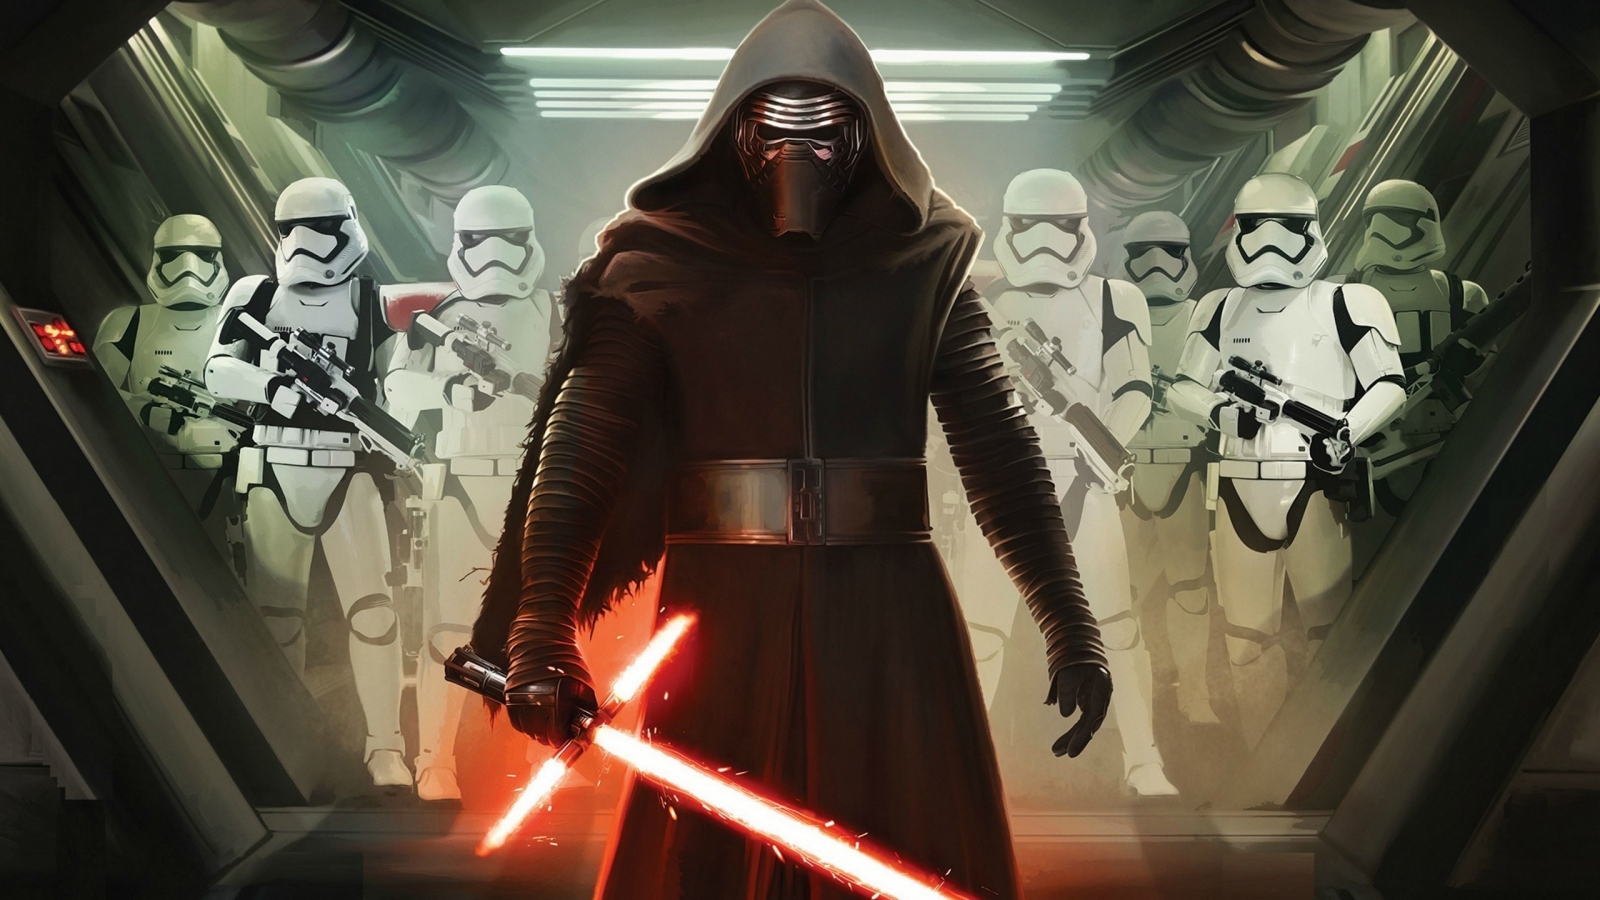 Star Wars VII Darth Vader and Storm Troopers for 1600 x 900 HDTV resolution